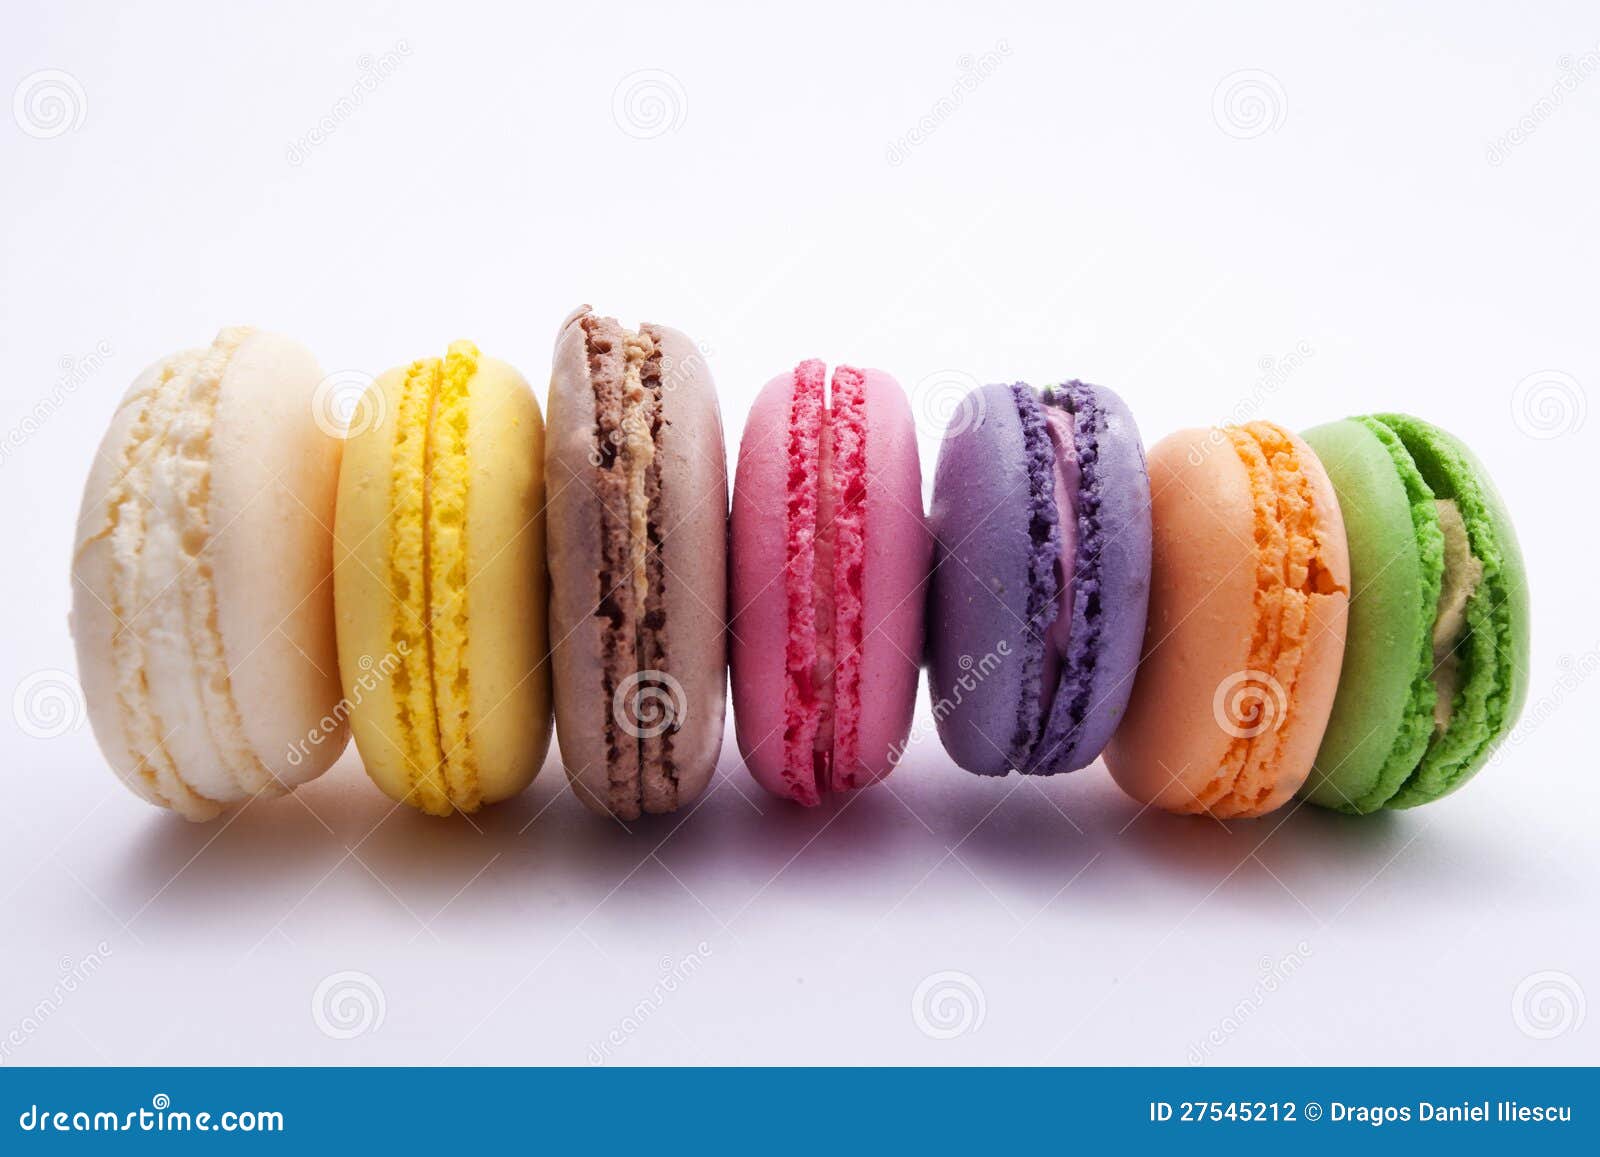 Colored dessert stock photo. Image of background, object - 27545212